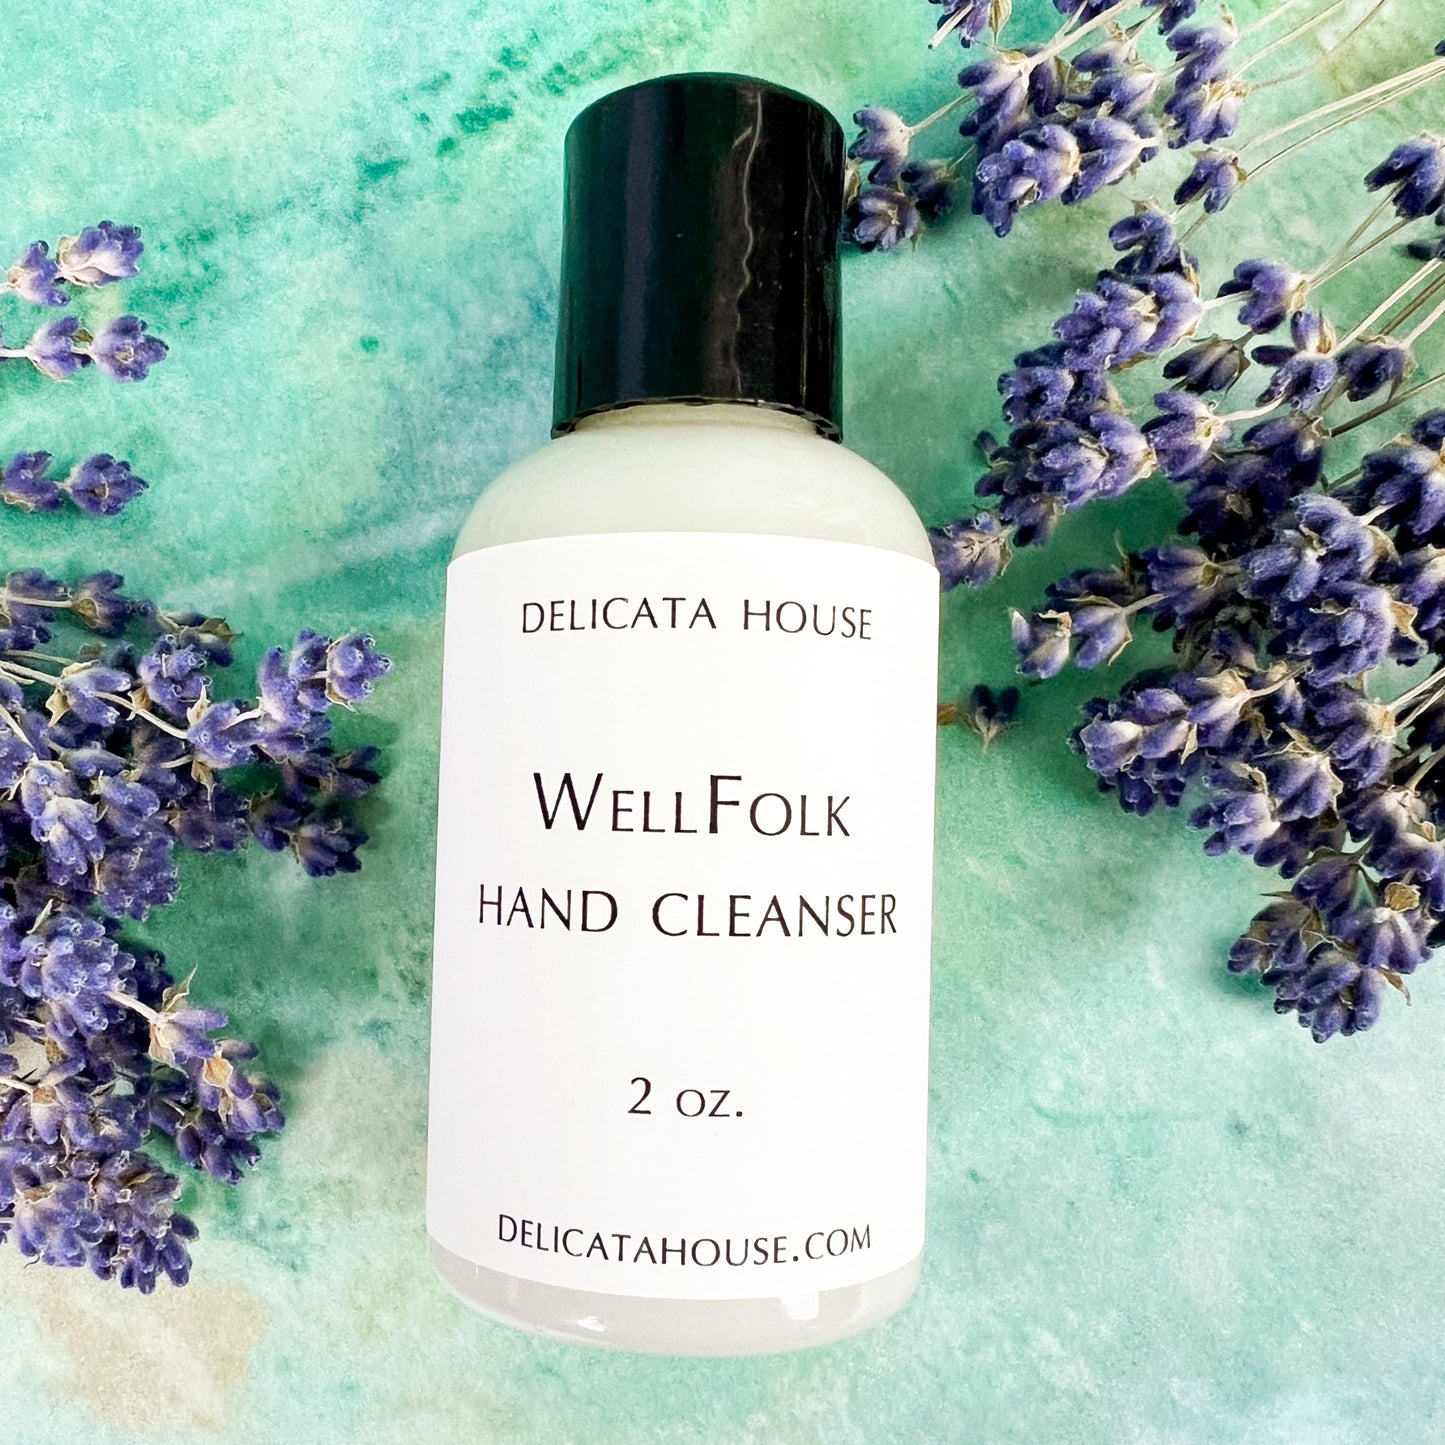 Hand Cleanser - WellFolk Hand Cleanser - Waterless Hand Cleanser - Aromatherapy Hand Cleaner - Hand Care Gift - Antimicrobial Hand Cleanser